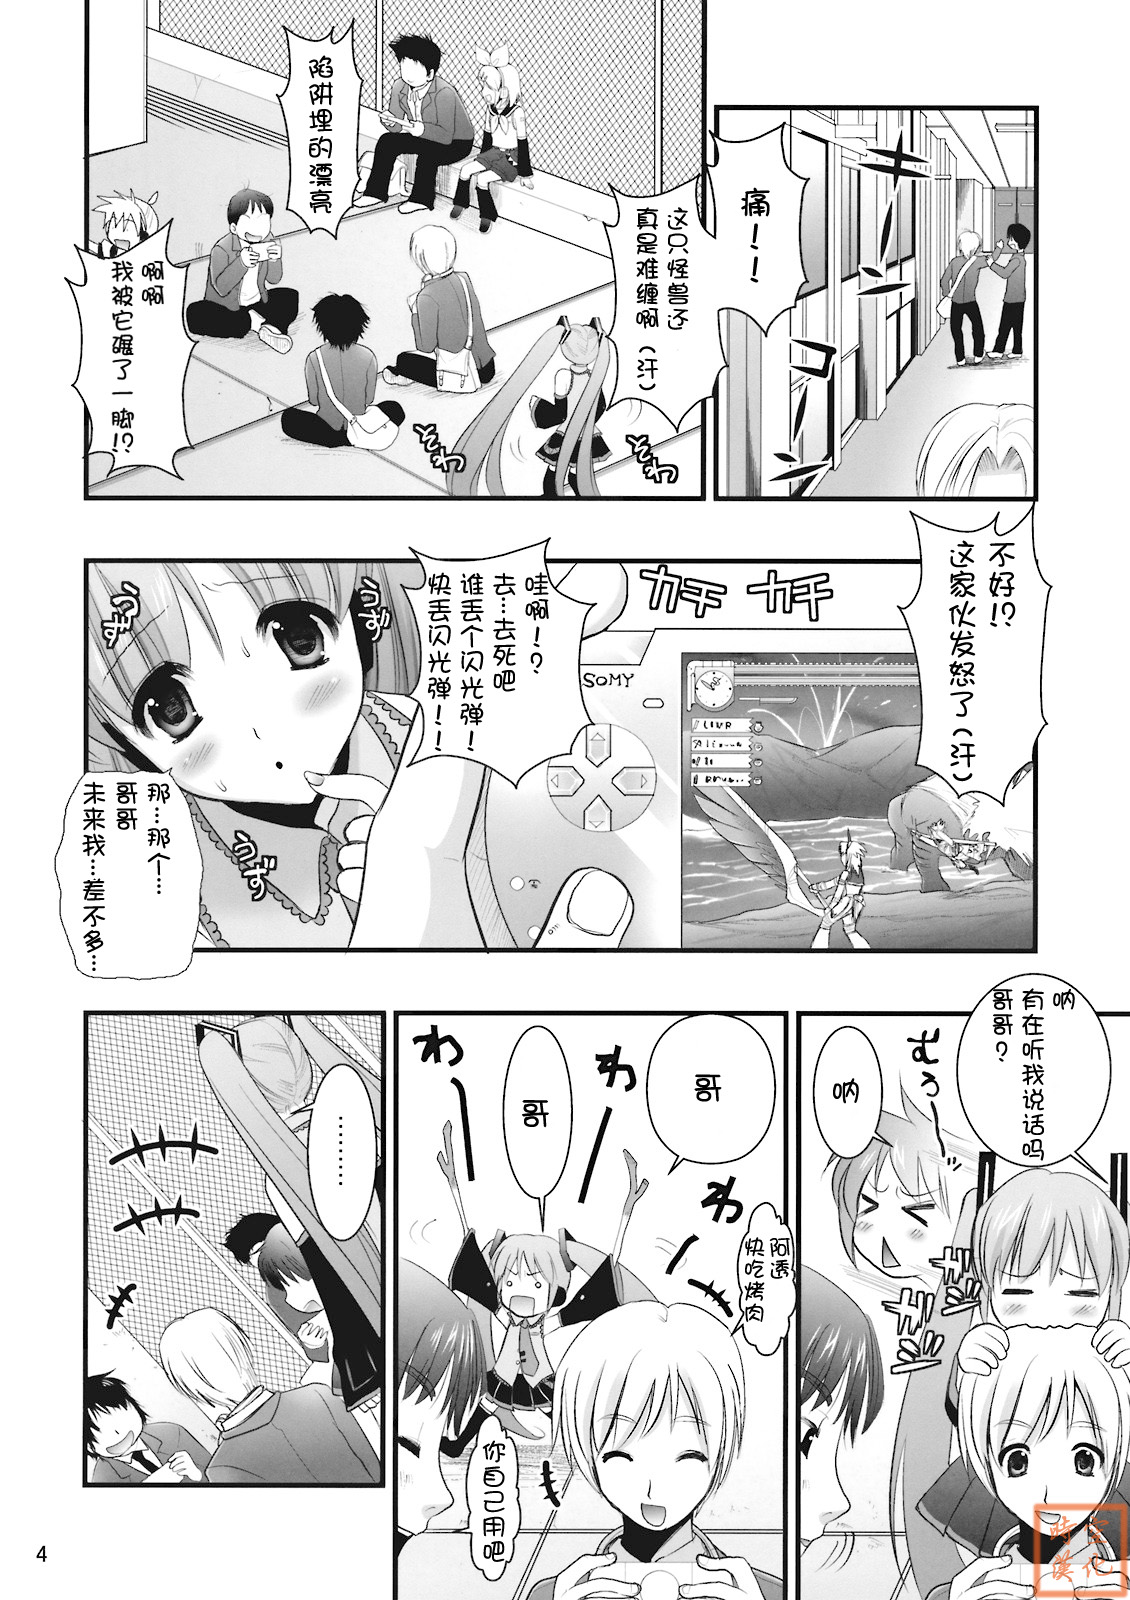 (C76) [CLOVER] H Miku (Vocaloid) [Chinese] (C76) (同人誌) [CLOVER] Hミク (初音ミク) [时空汉化组]